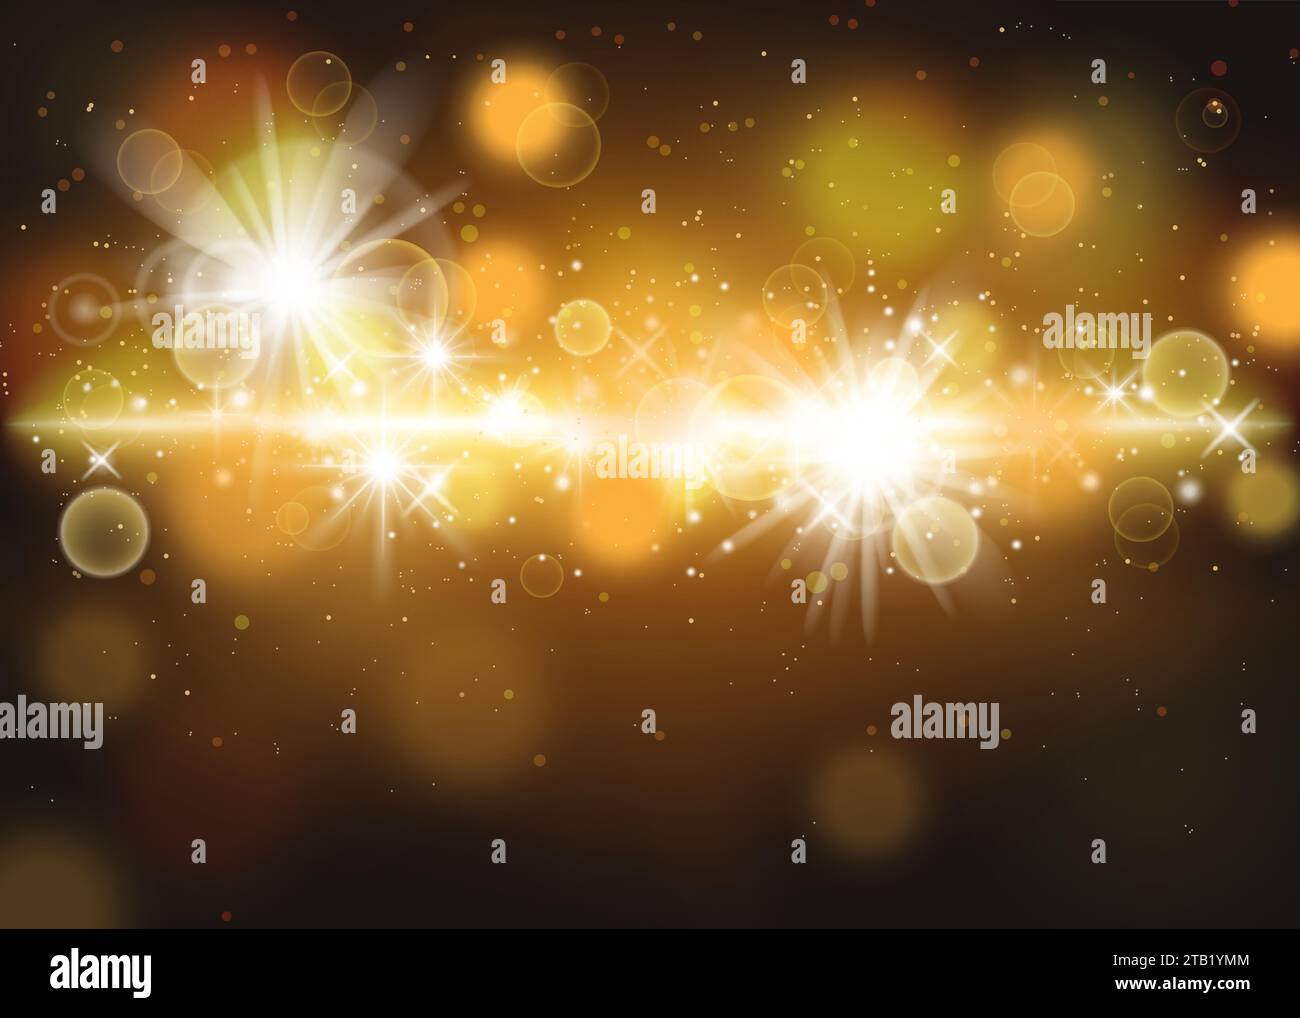 Bokeh Abstract Background with Glitter Lights. Bokeh lights at night, blurry shiny speckles. Vector illustration. Eps 10. Stock Vector